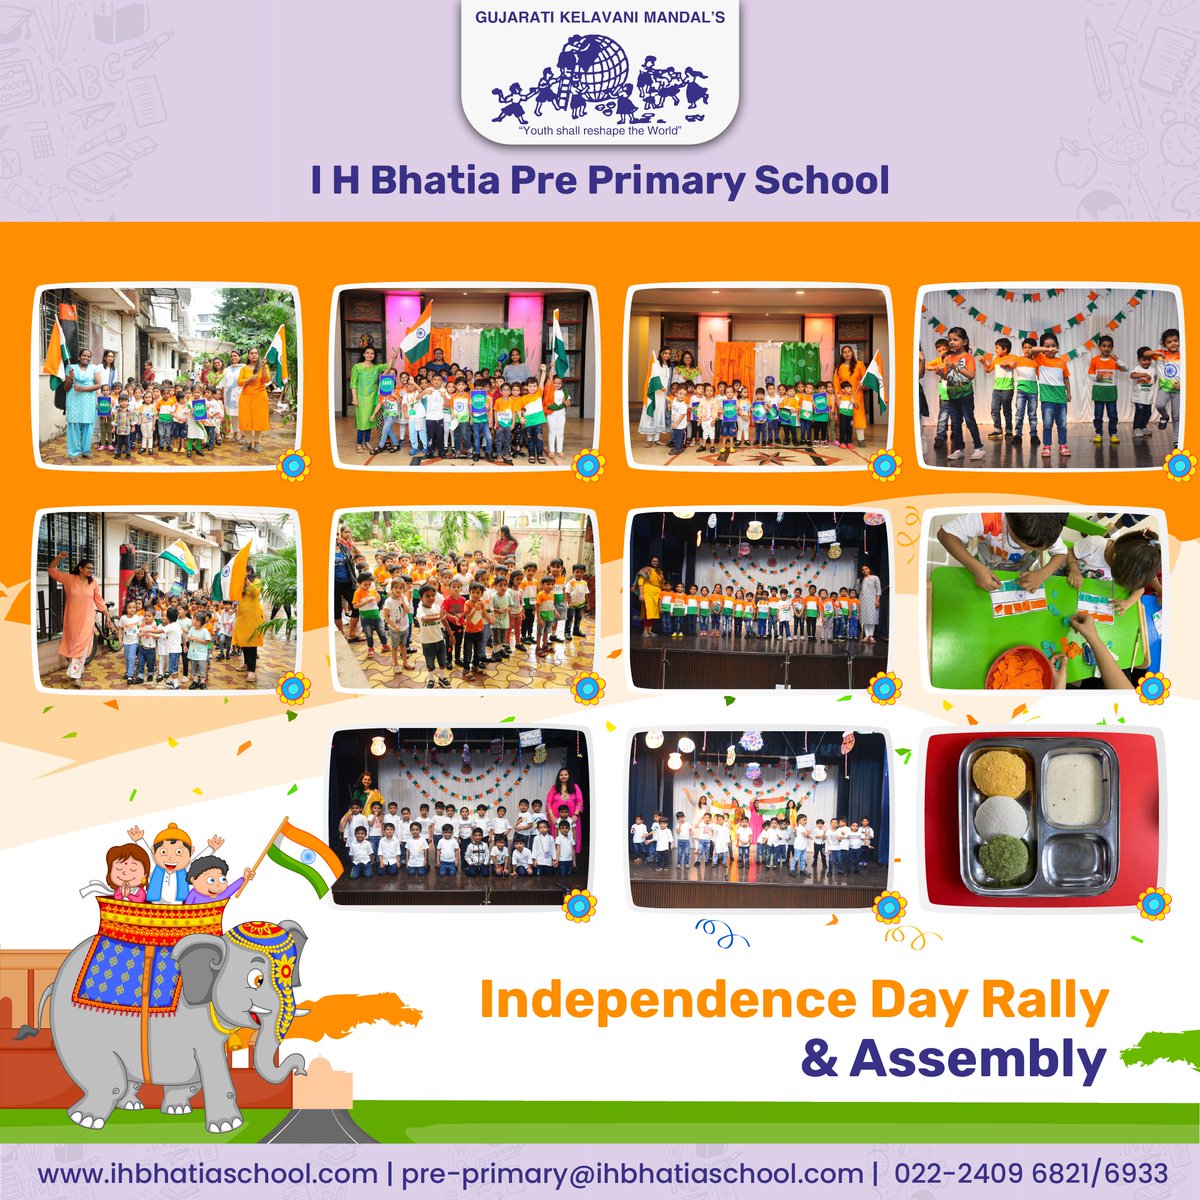 @IHBhatiaPrimary school marked the #75thIndependenceDay all through the week with a variety of #activities. Children performed on stage,  participated in a #rally on the #schoolcampus with the slogan of #HarGharTirangaa & made flags as an activity involving #sensorymotorskills.